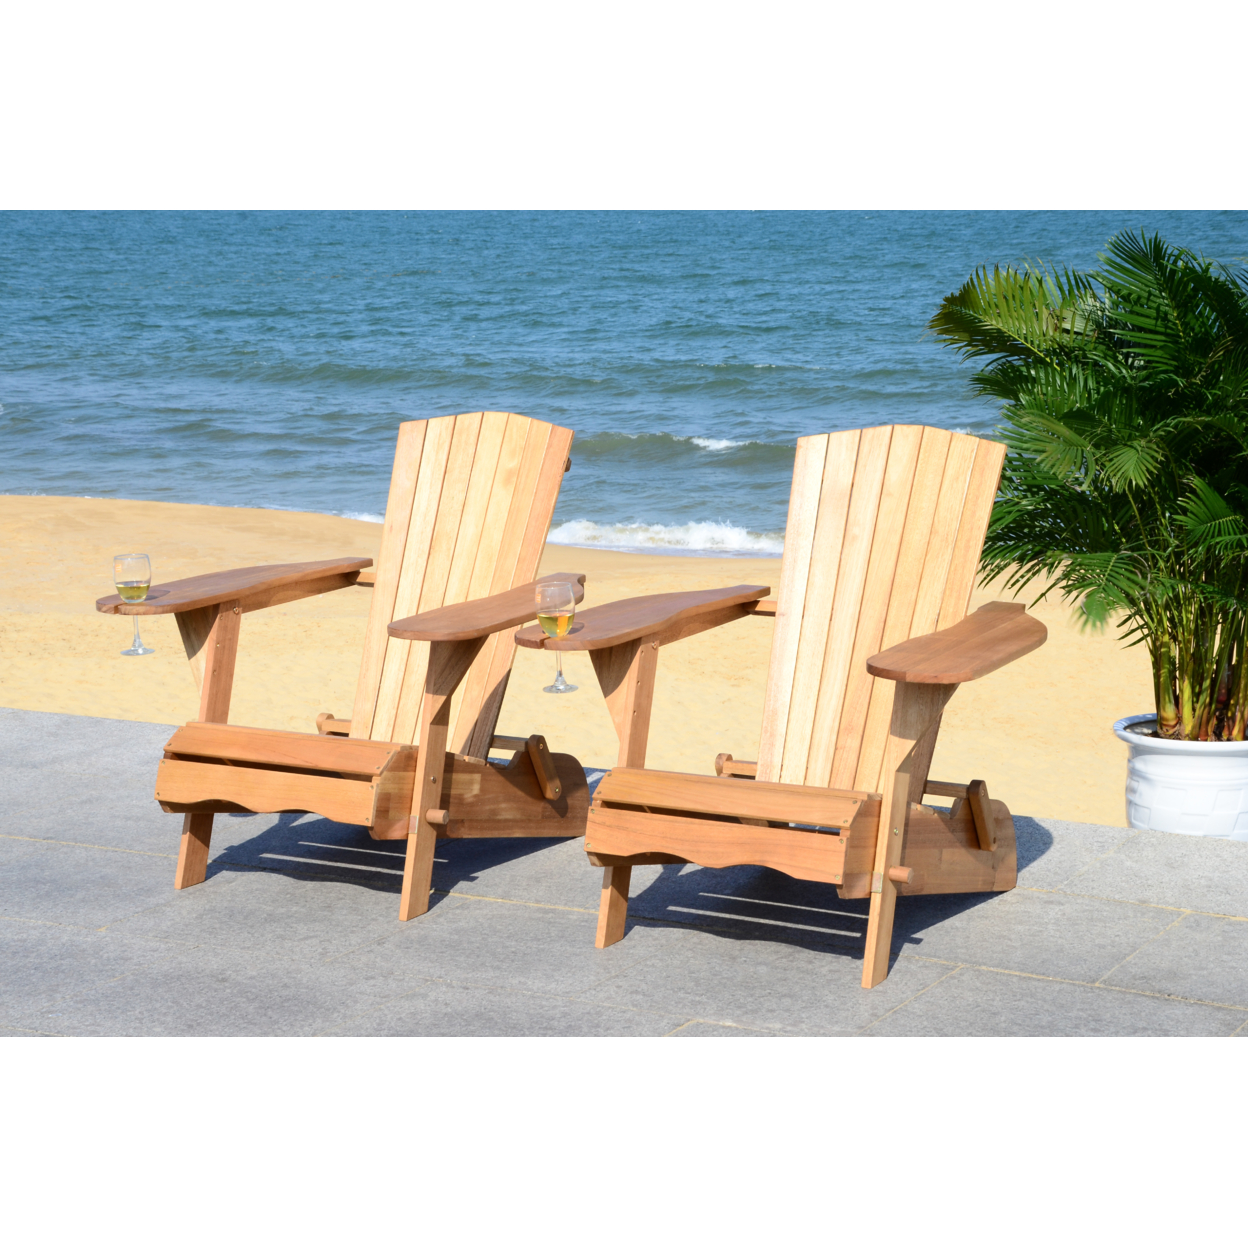 SAFAVIEH Outdoor Collection Breetel Set Of 2 Adirondack Chairs Natural